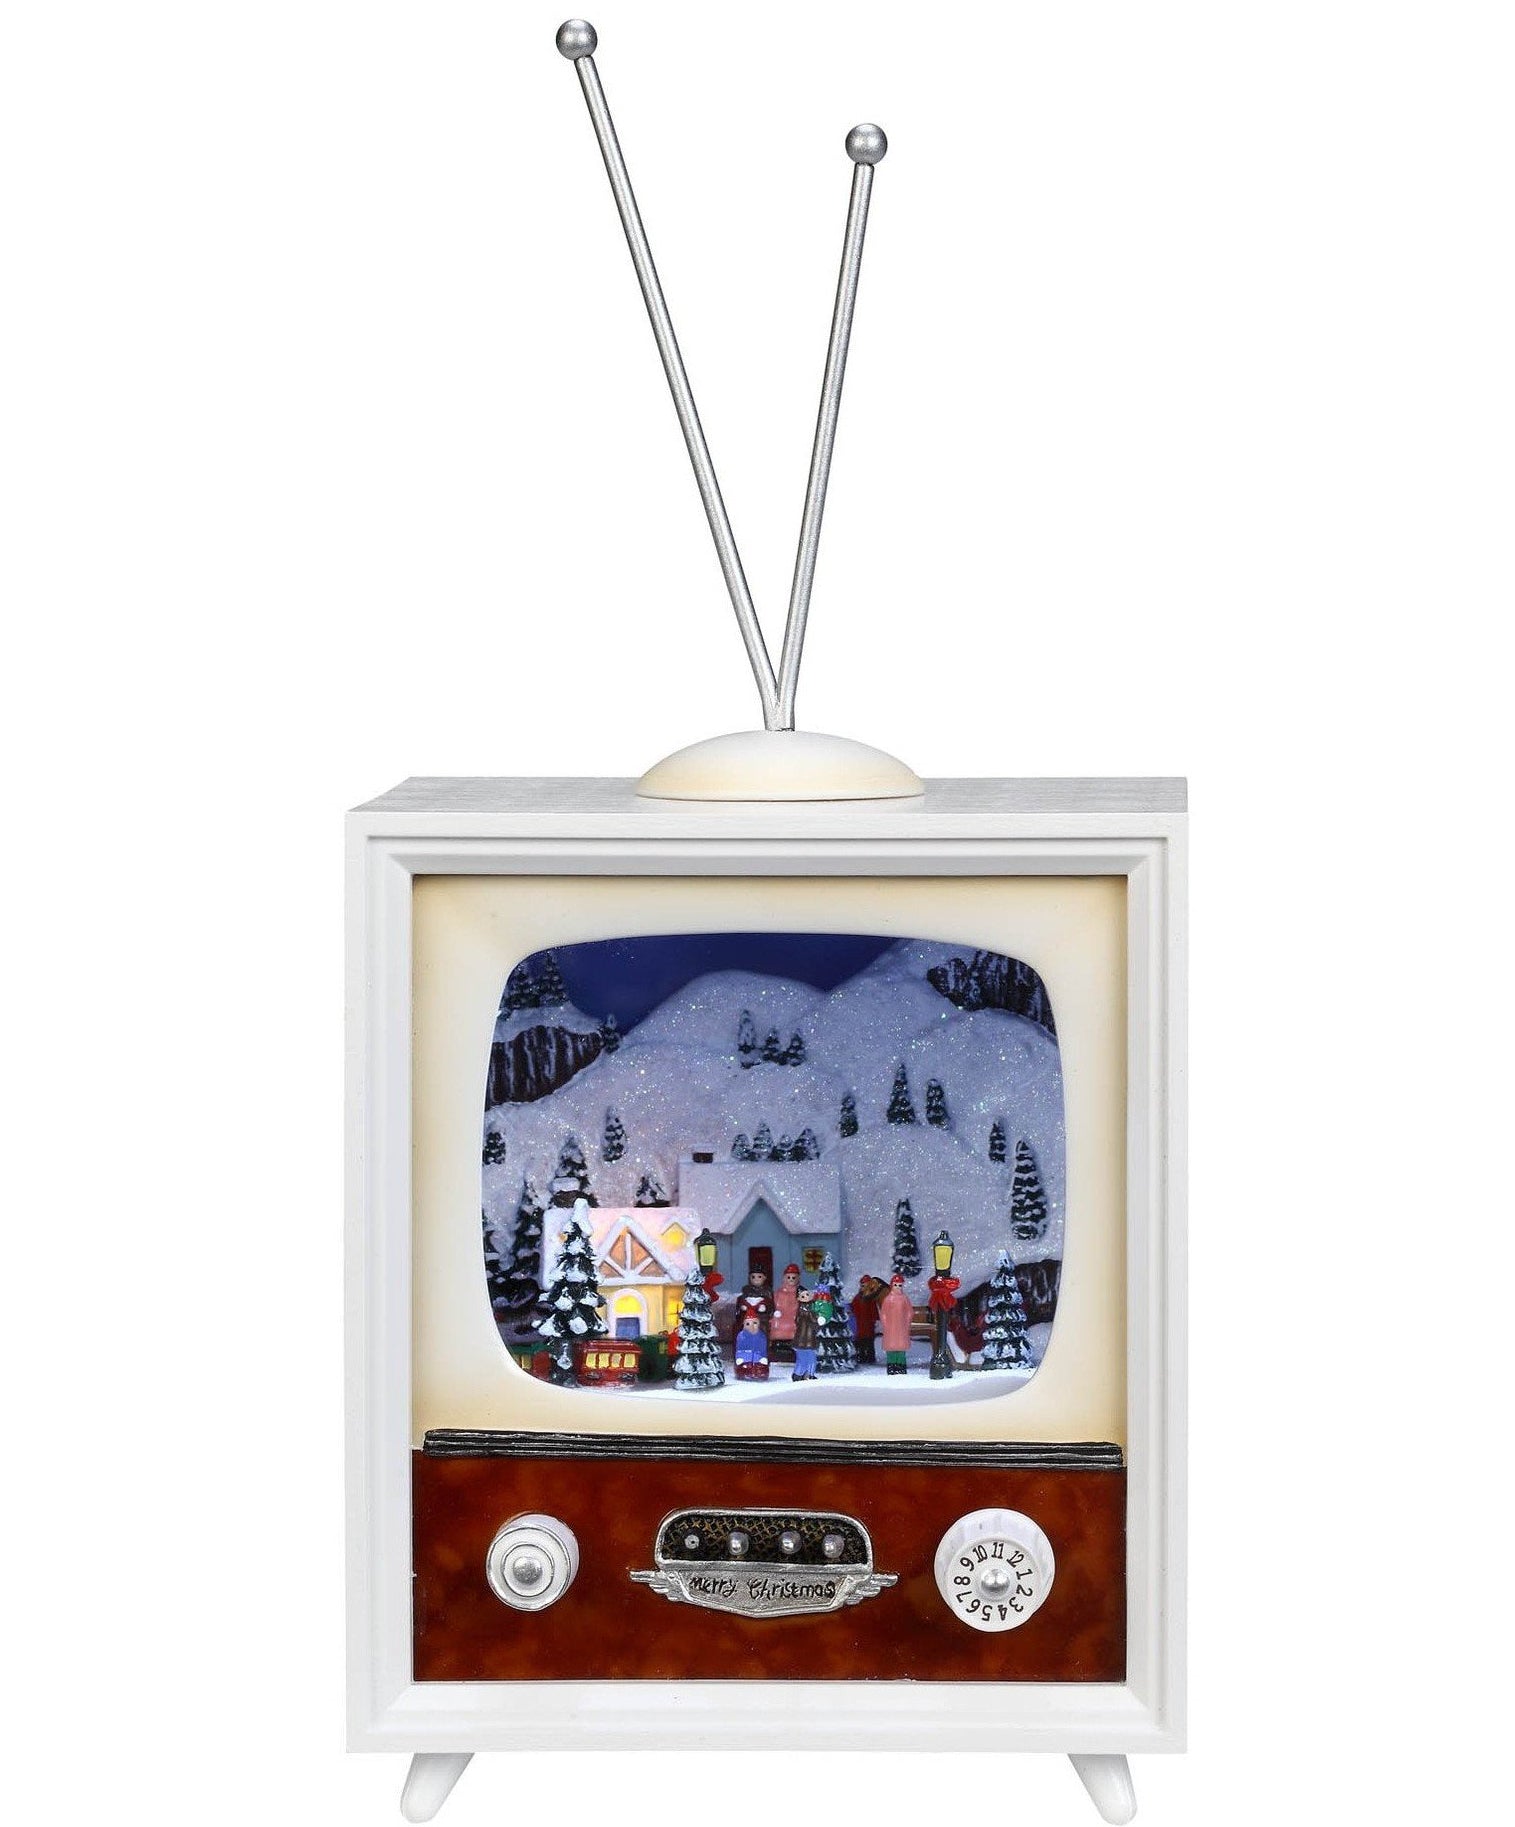 Musical Christmas Village Vintage TV Box With Moving Train - White